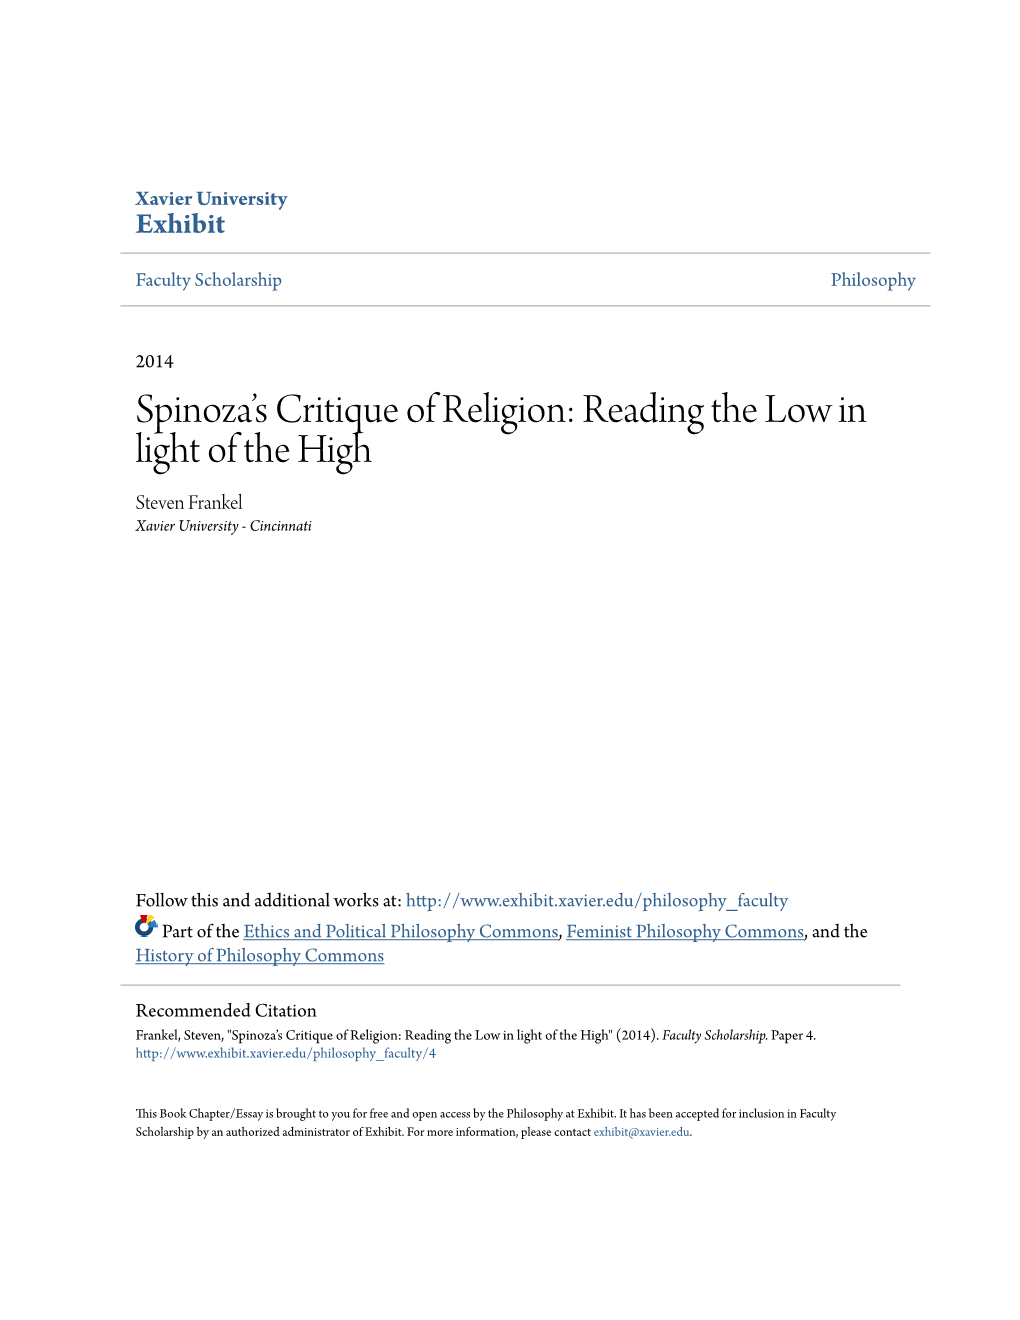 Spinoza's Critique of Religion: Reading the Low in Light of the High